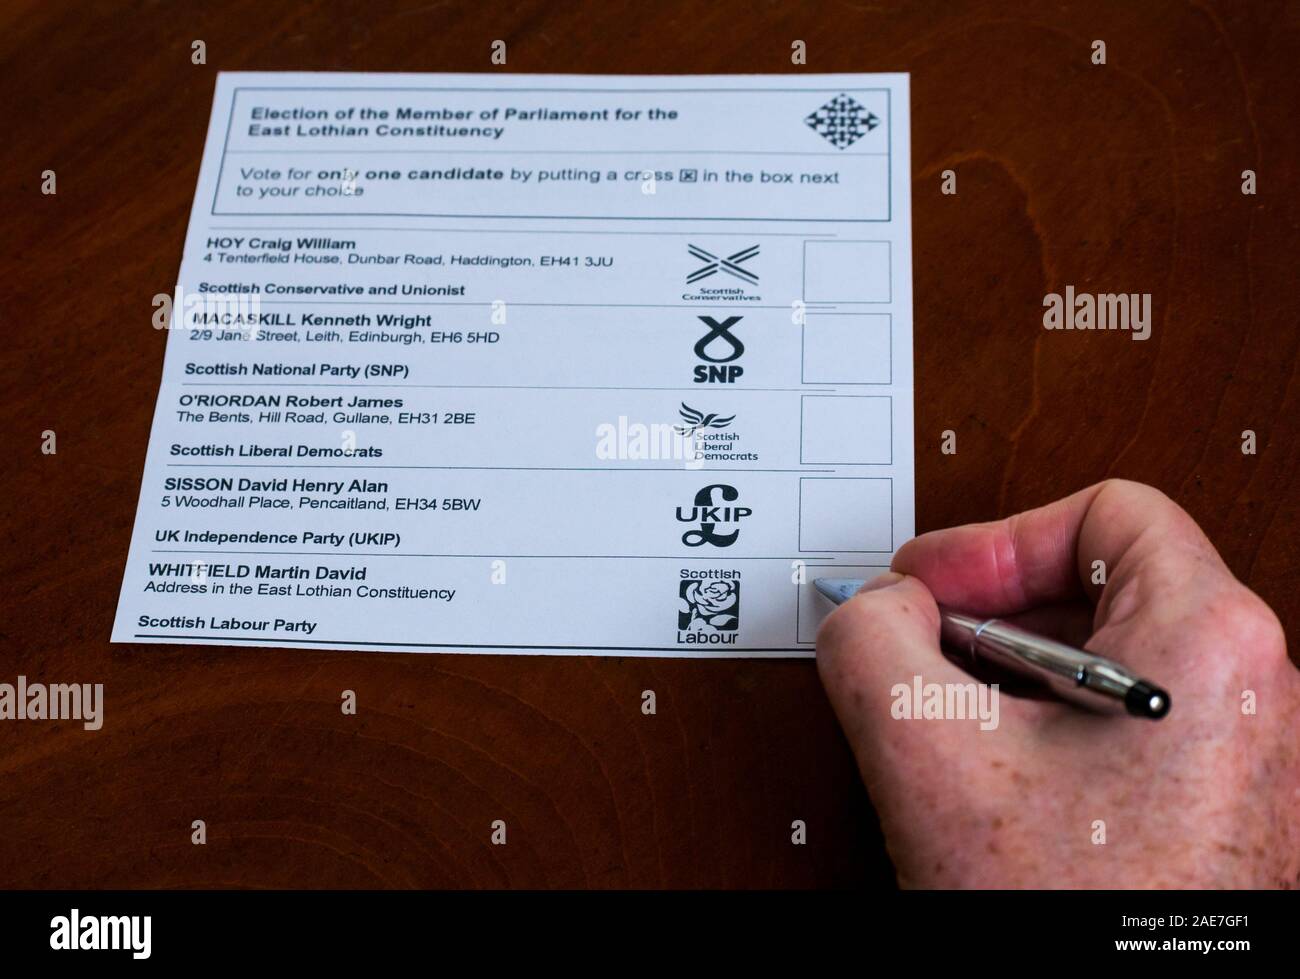 Man voting for Scottish Labour candidate Martin Whitfield on postal ballot paper in general election 2019 in East Lothian constituency, Scotland, UK Stock Photo